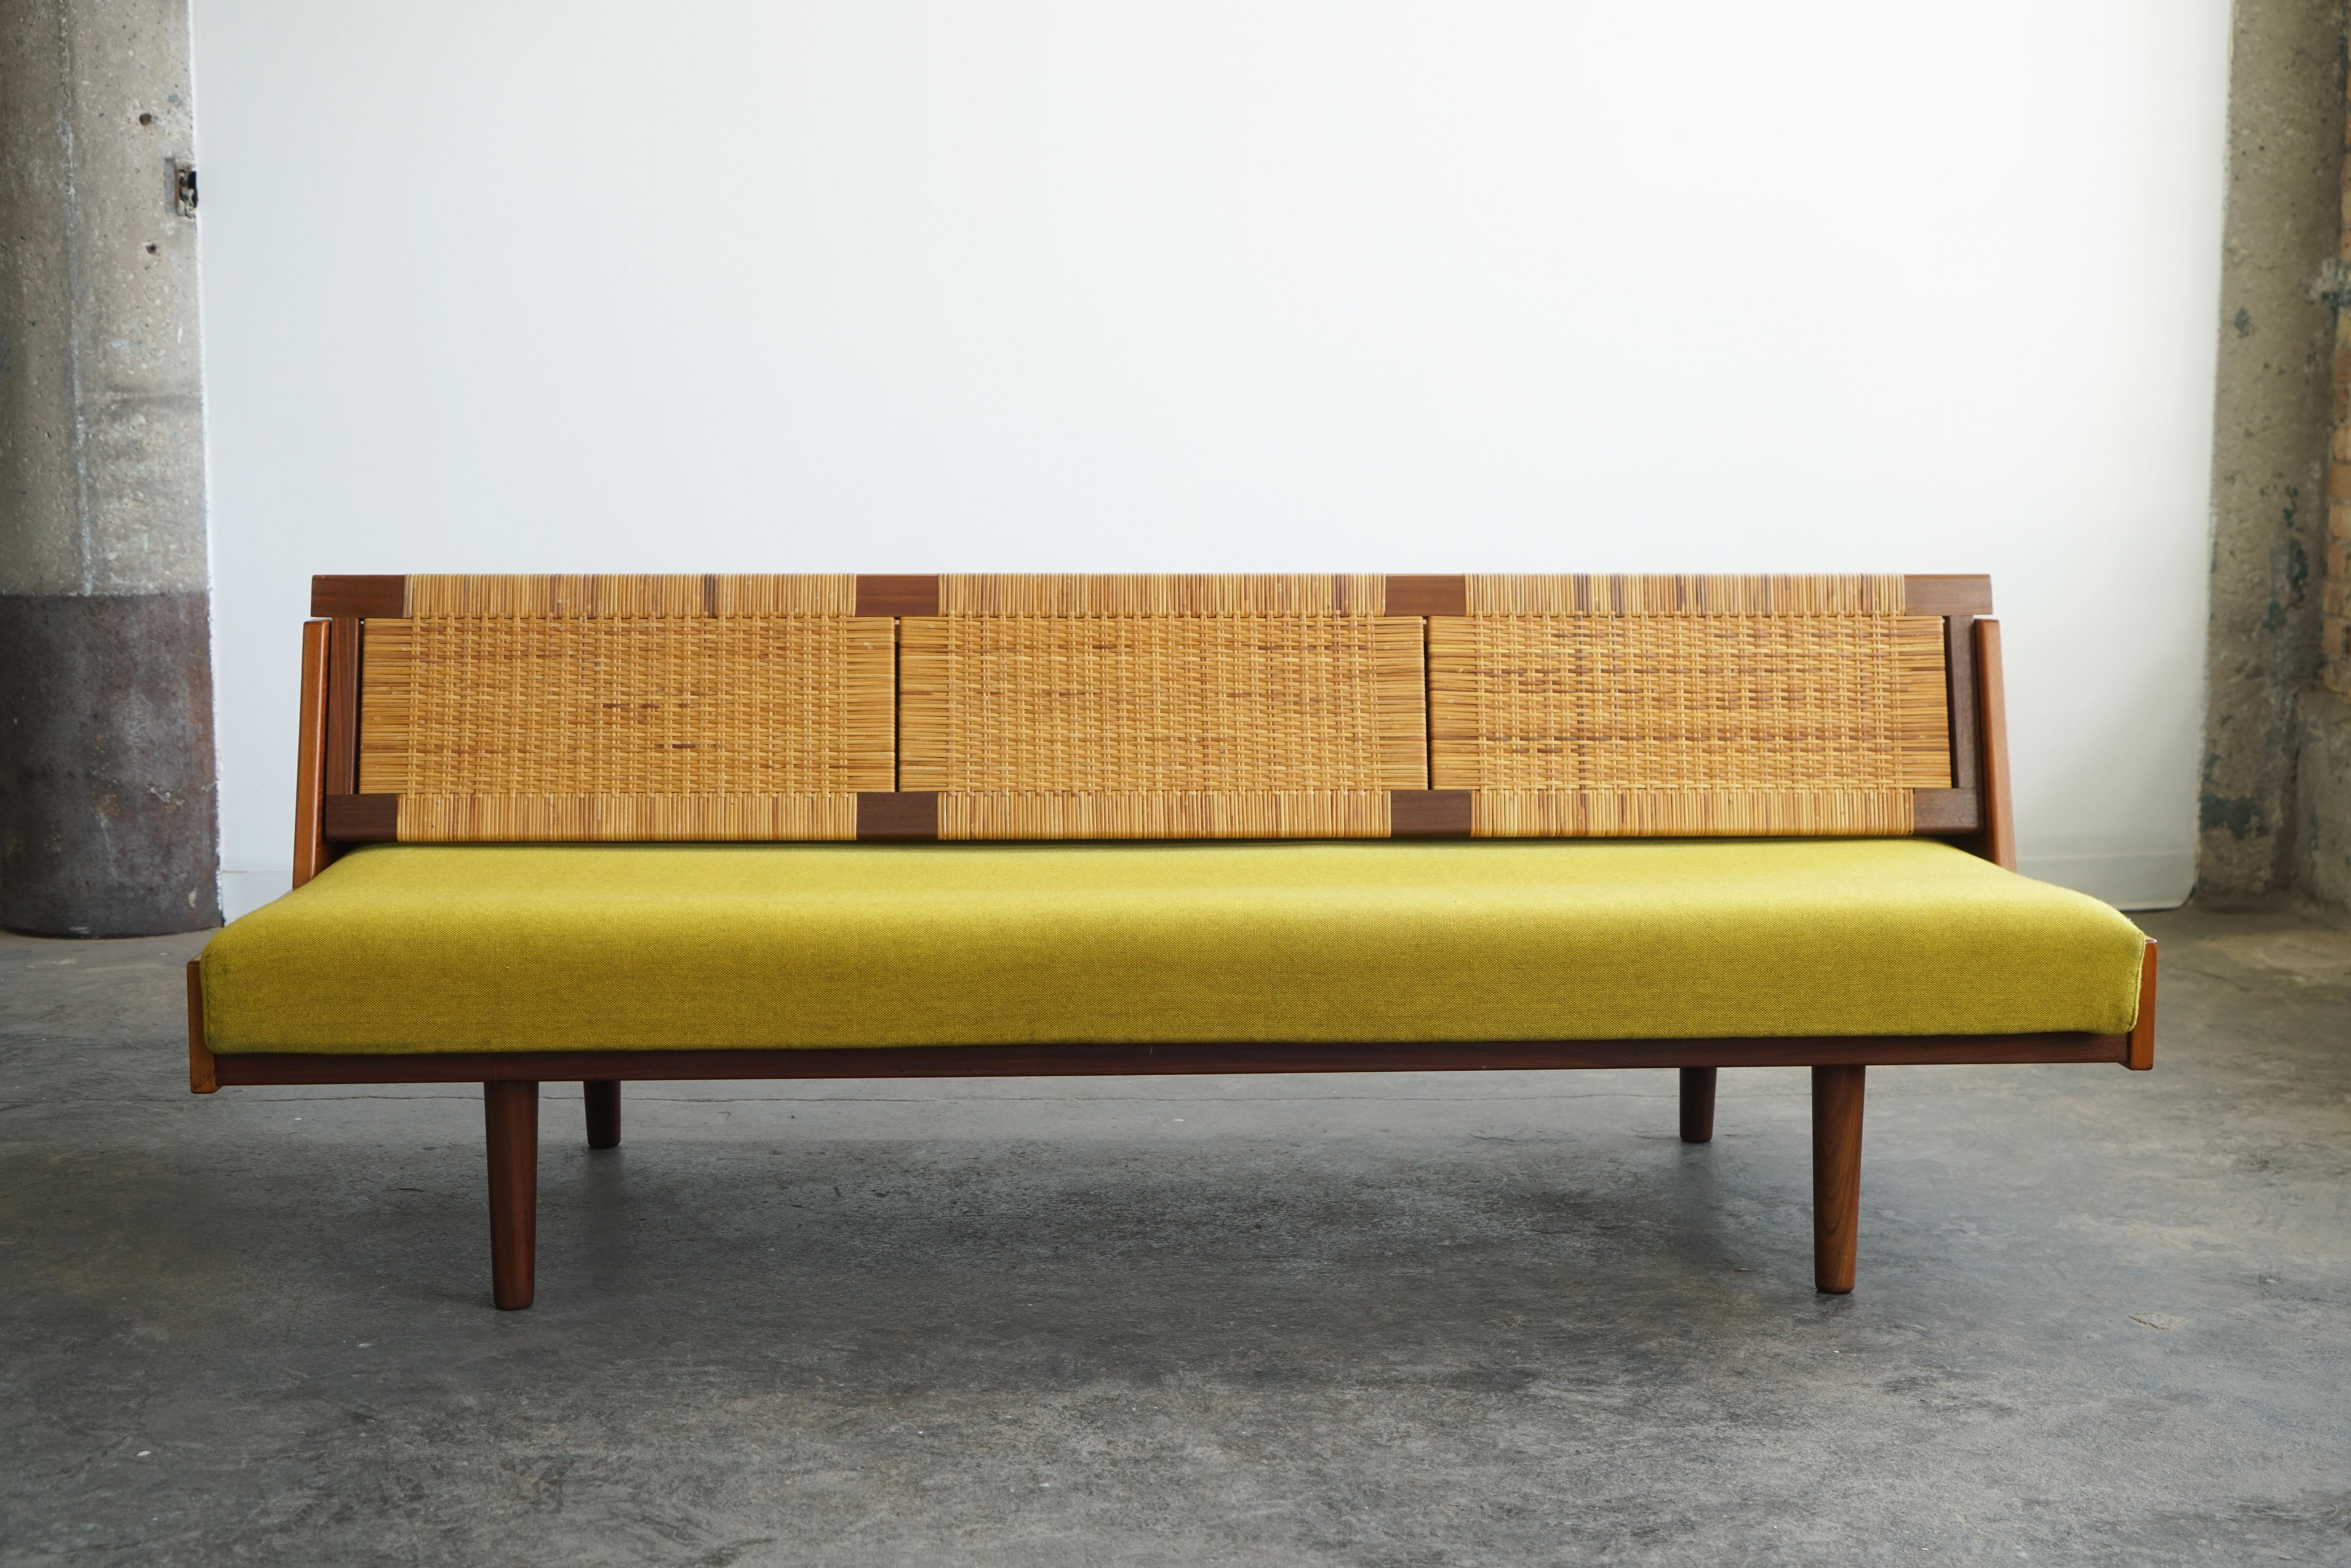 Hans Wegner Sofa Daybed Model GE7 in Teak and Cane 1960's for Getama In Good Condition For Sale In Chicago, IL